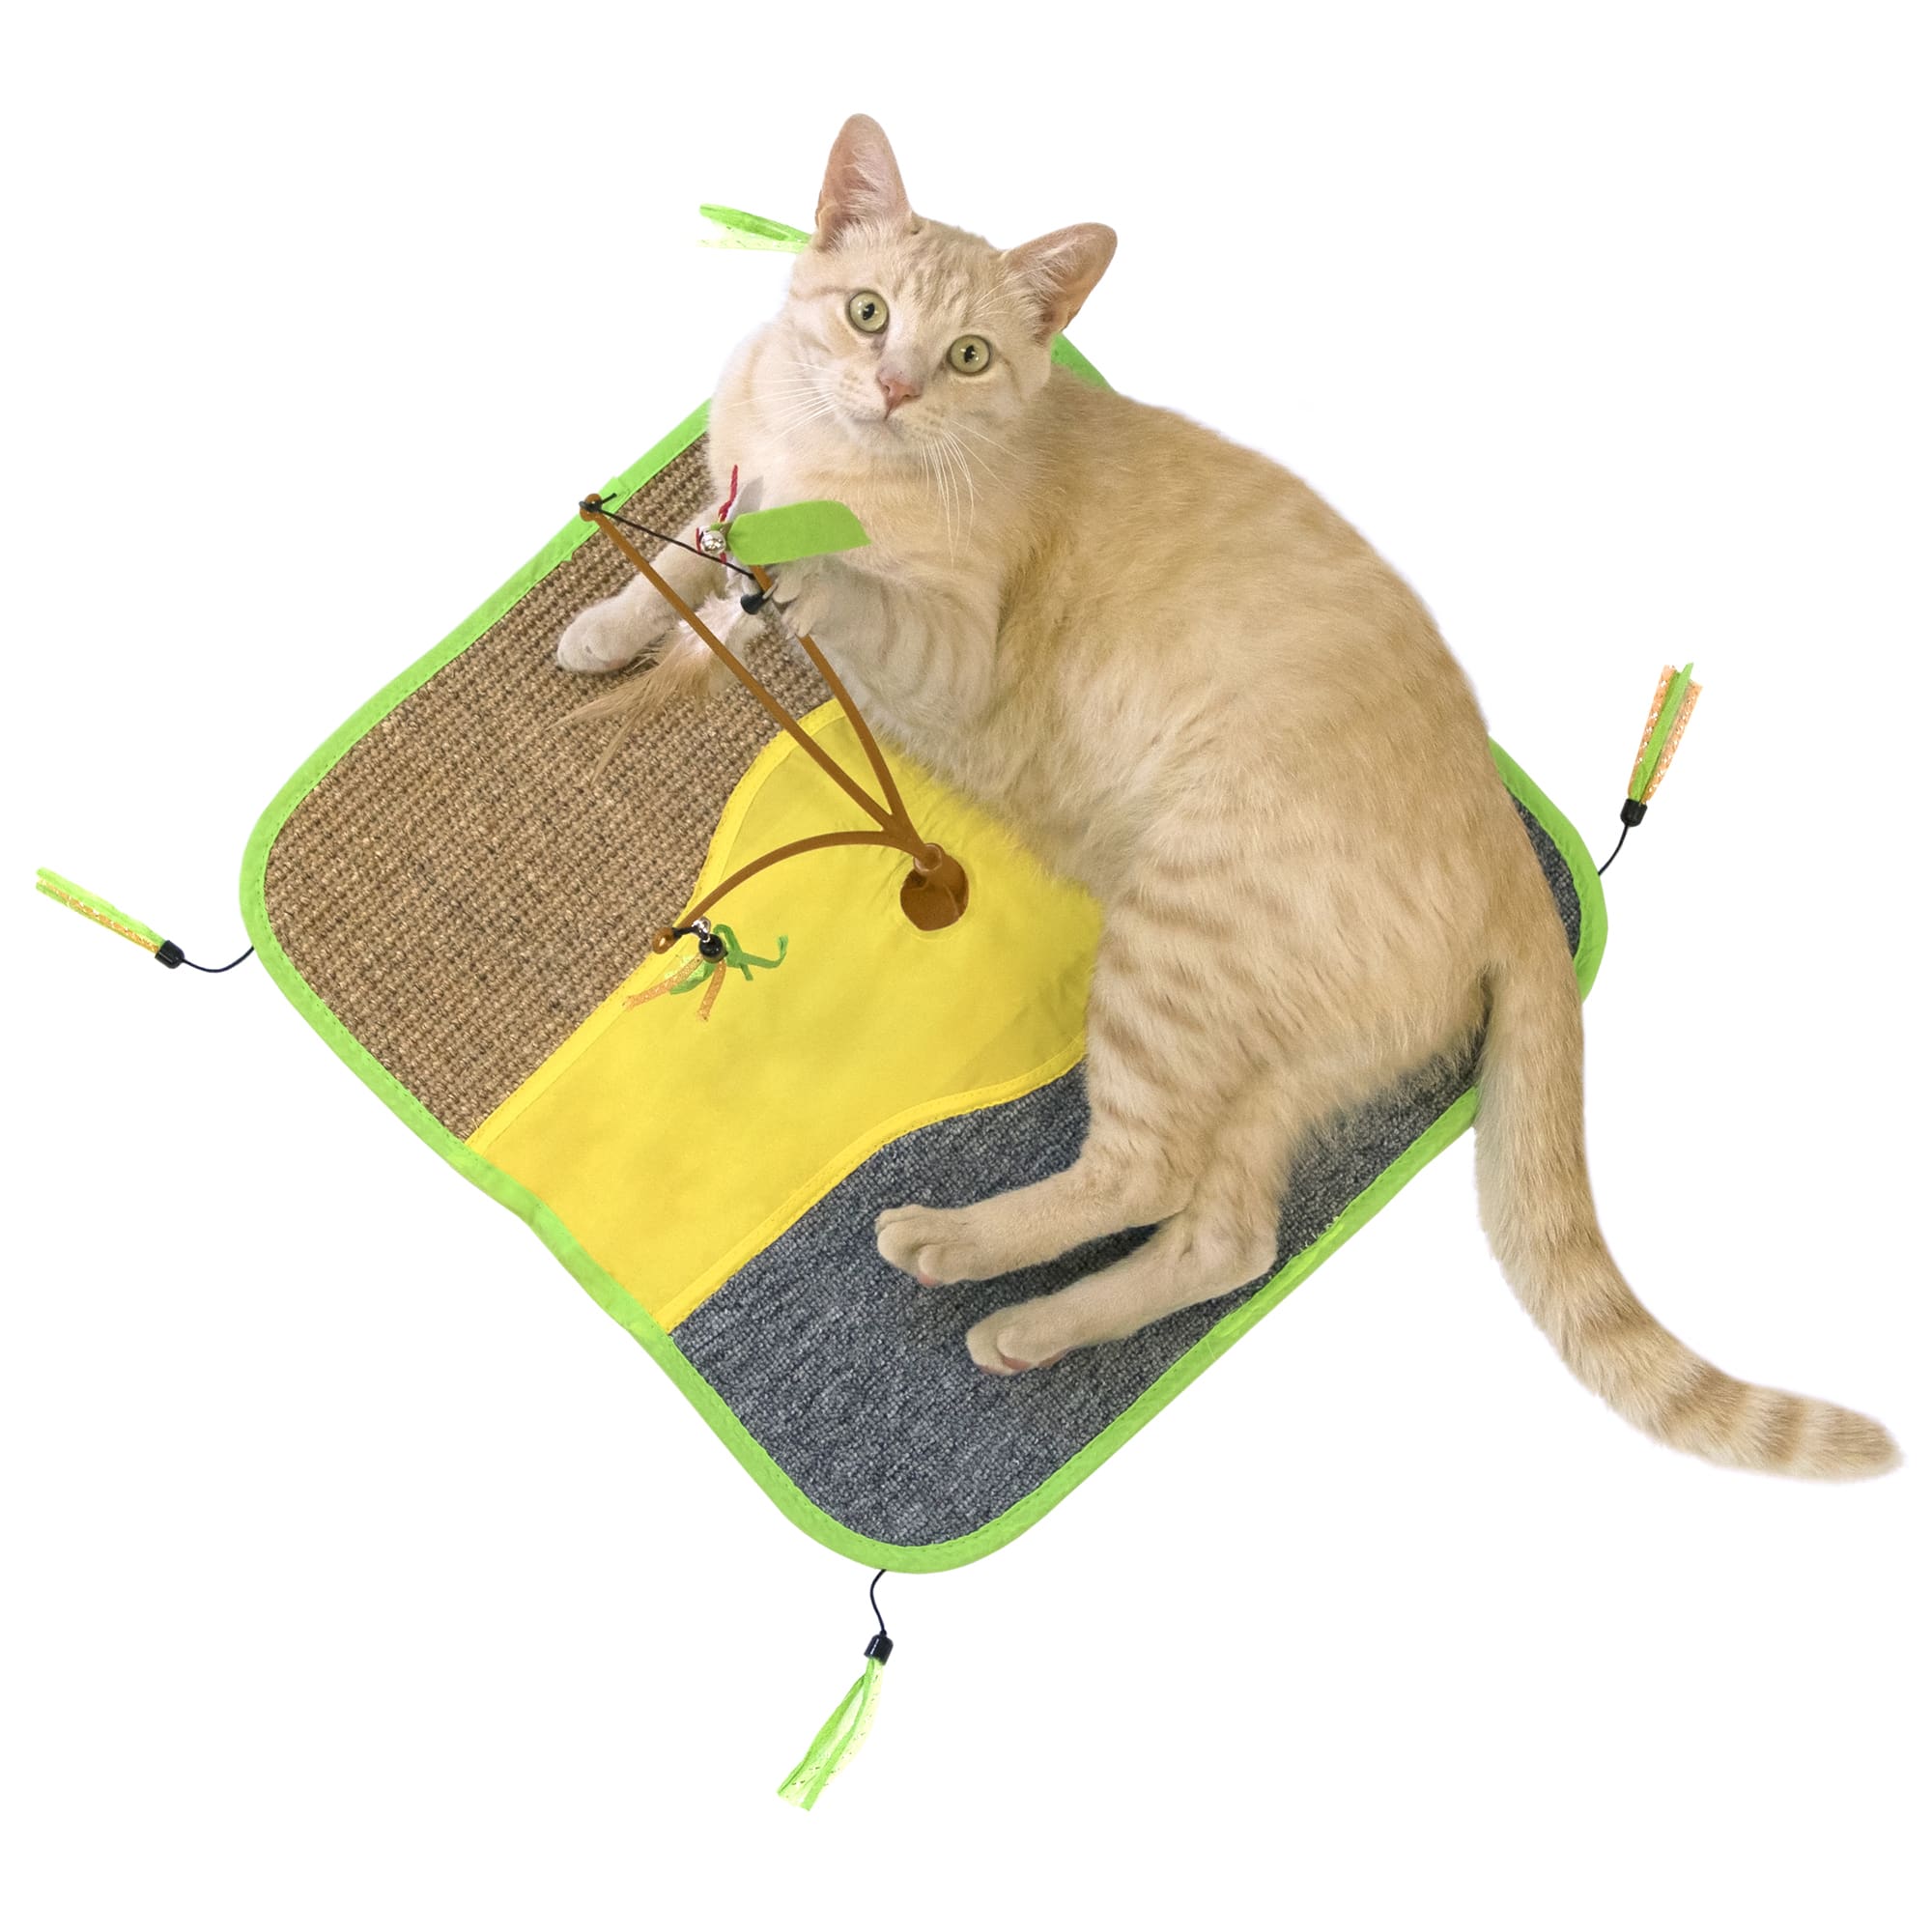 Kitty City Wobble Play Mat for Cats 